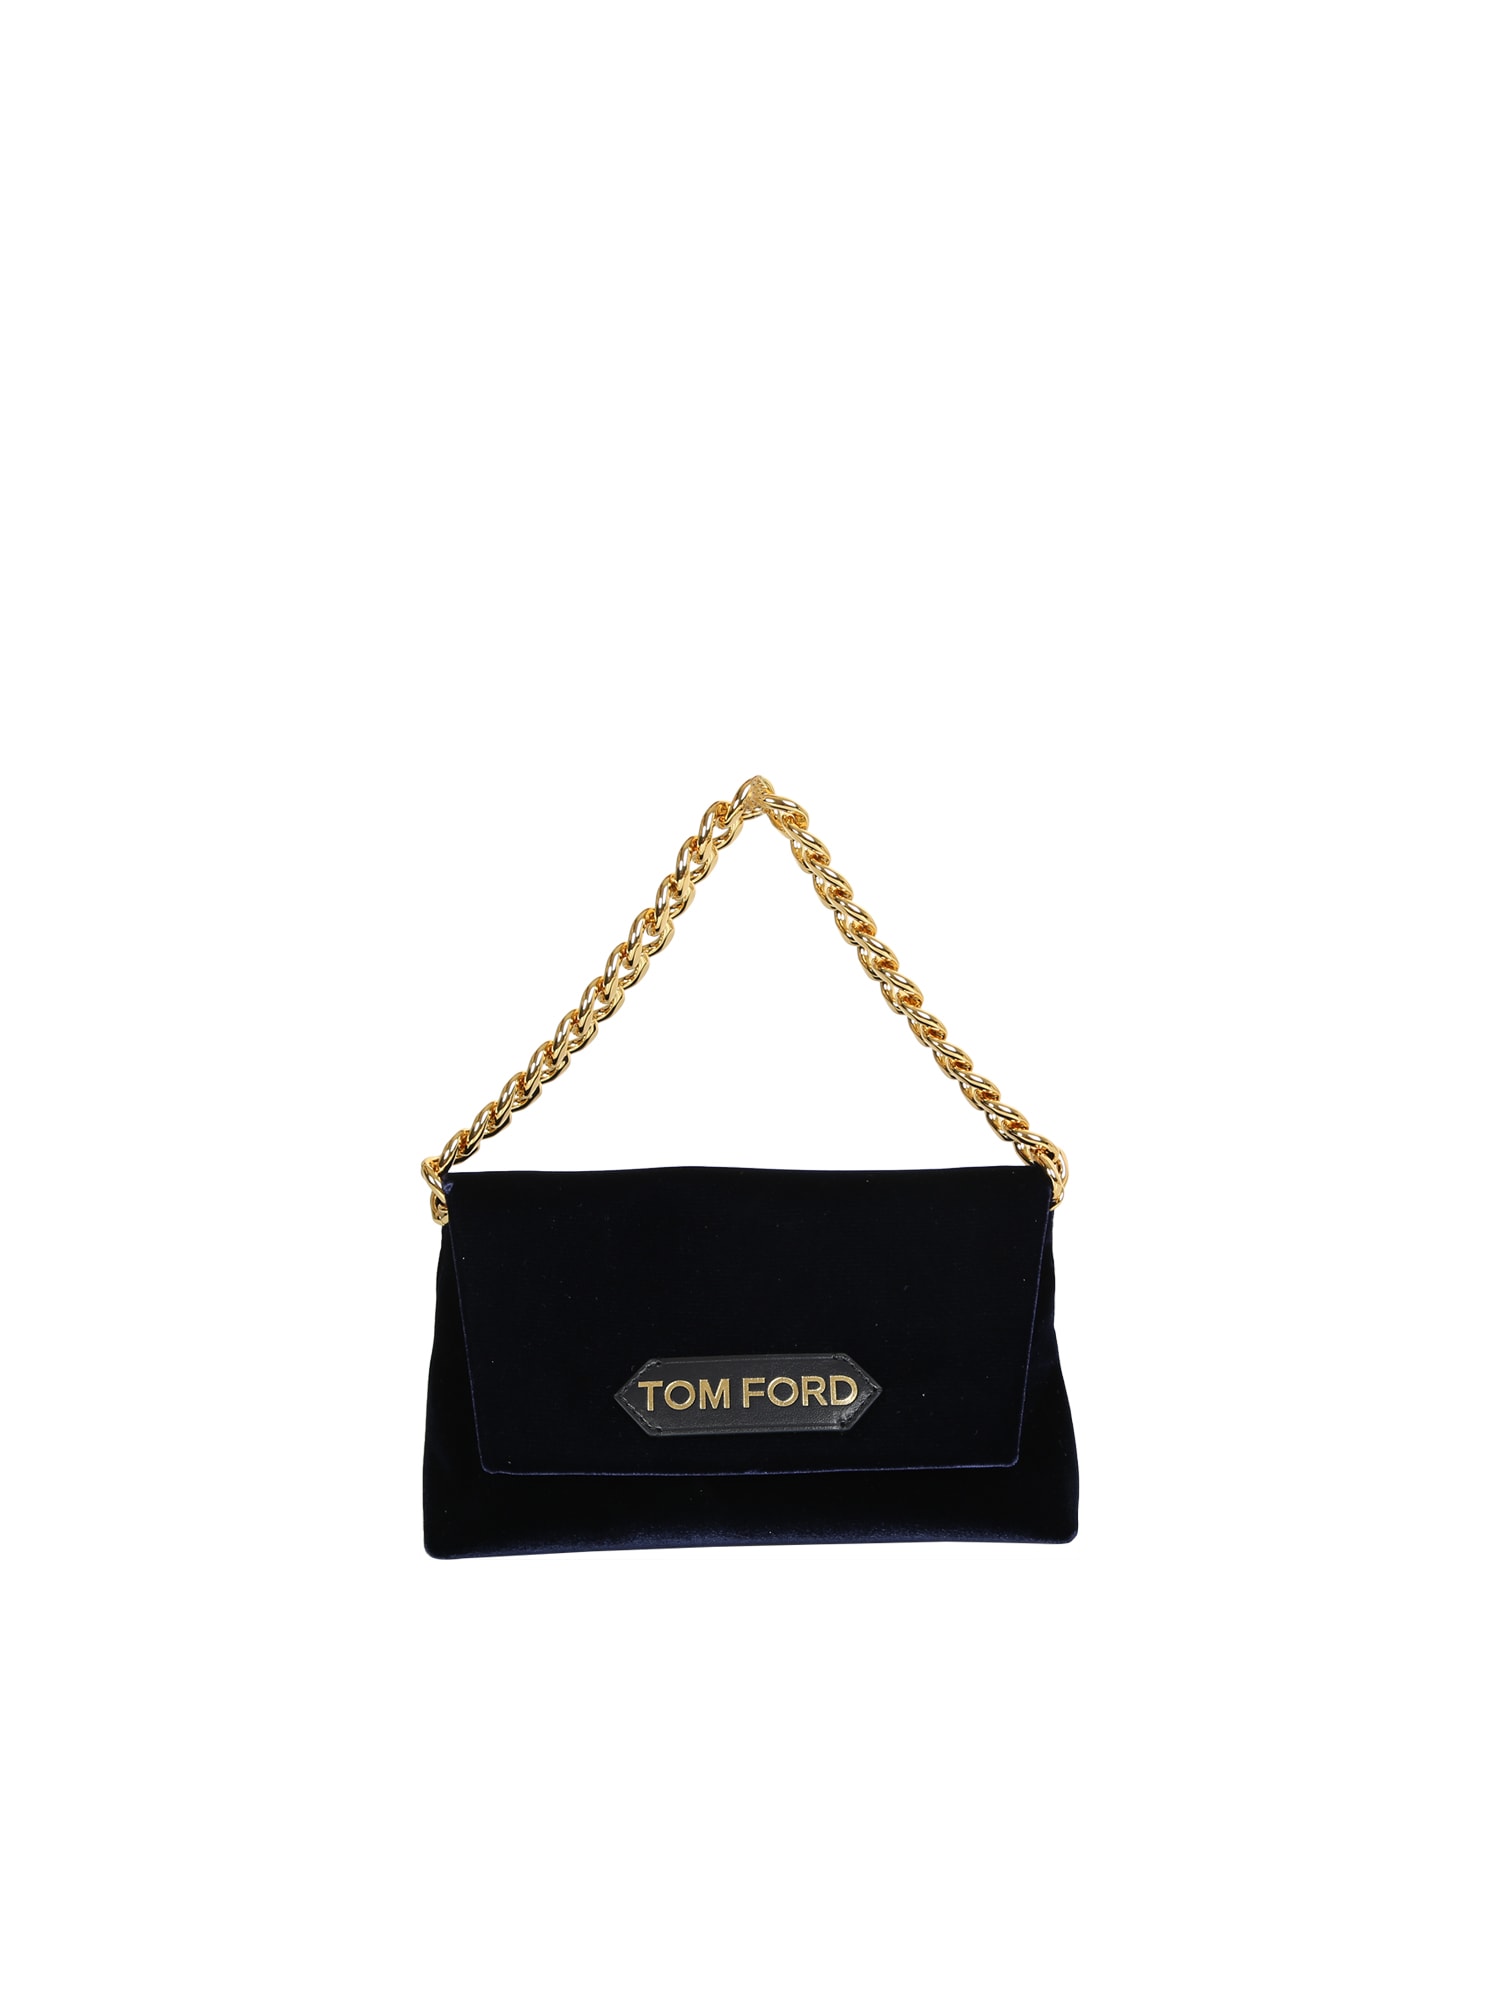 Tom Ford Label Mini Chain Bag; Refined And Casual, It Is Ideal For The Most Exclusive Looks